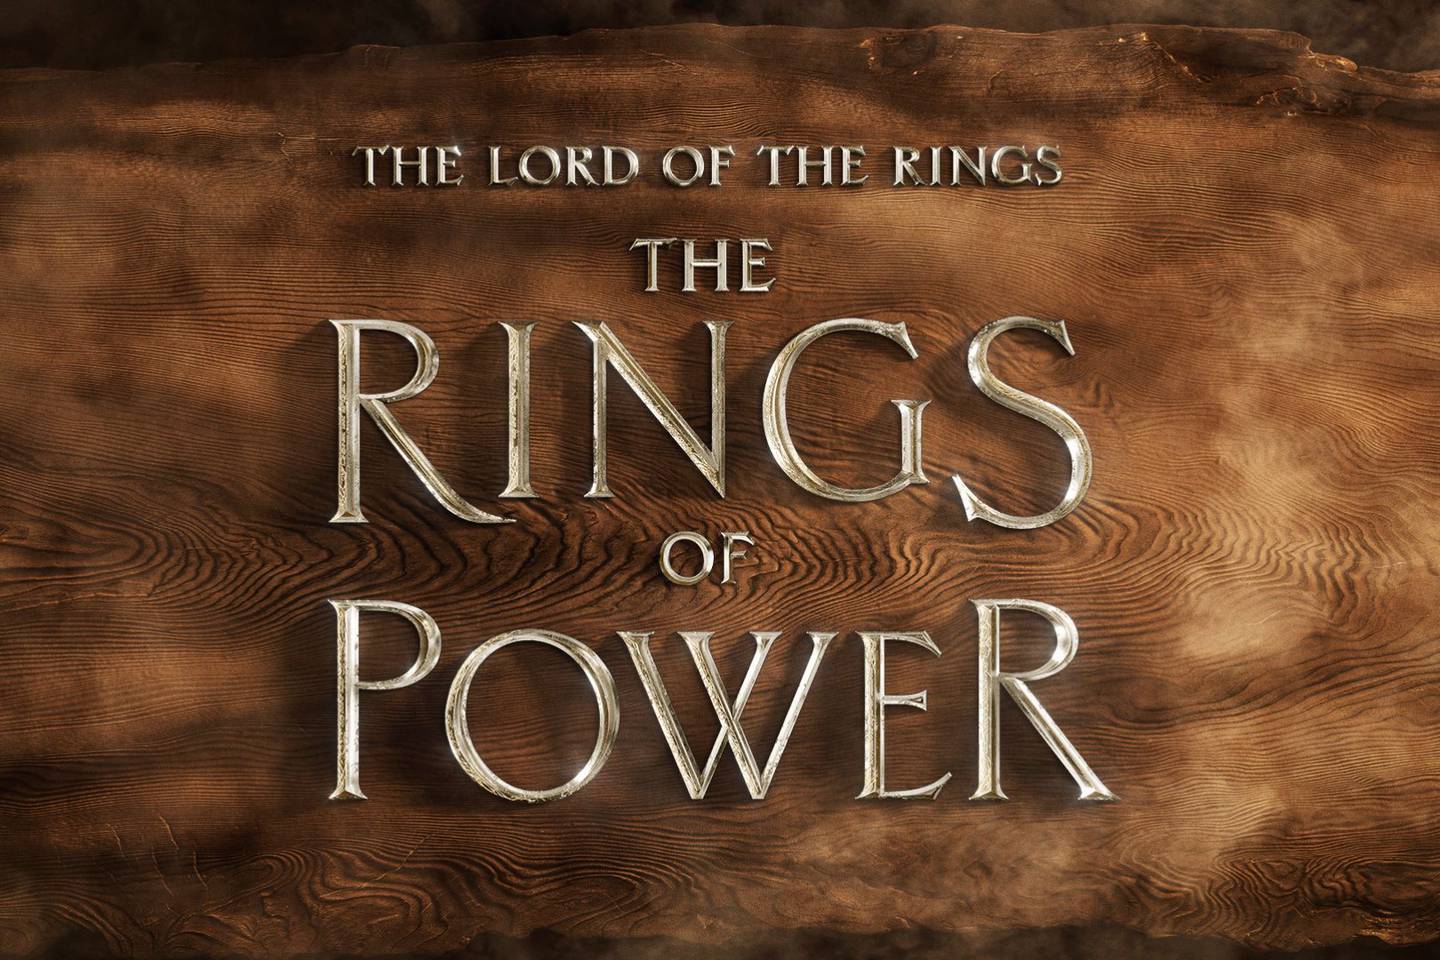 WILL I BE CENSORED?! - I reviewed Rings of Power on  and